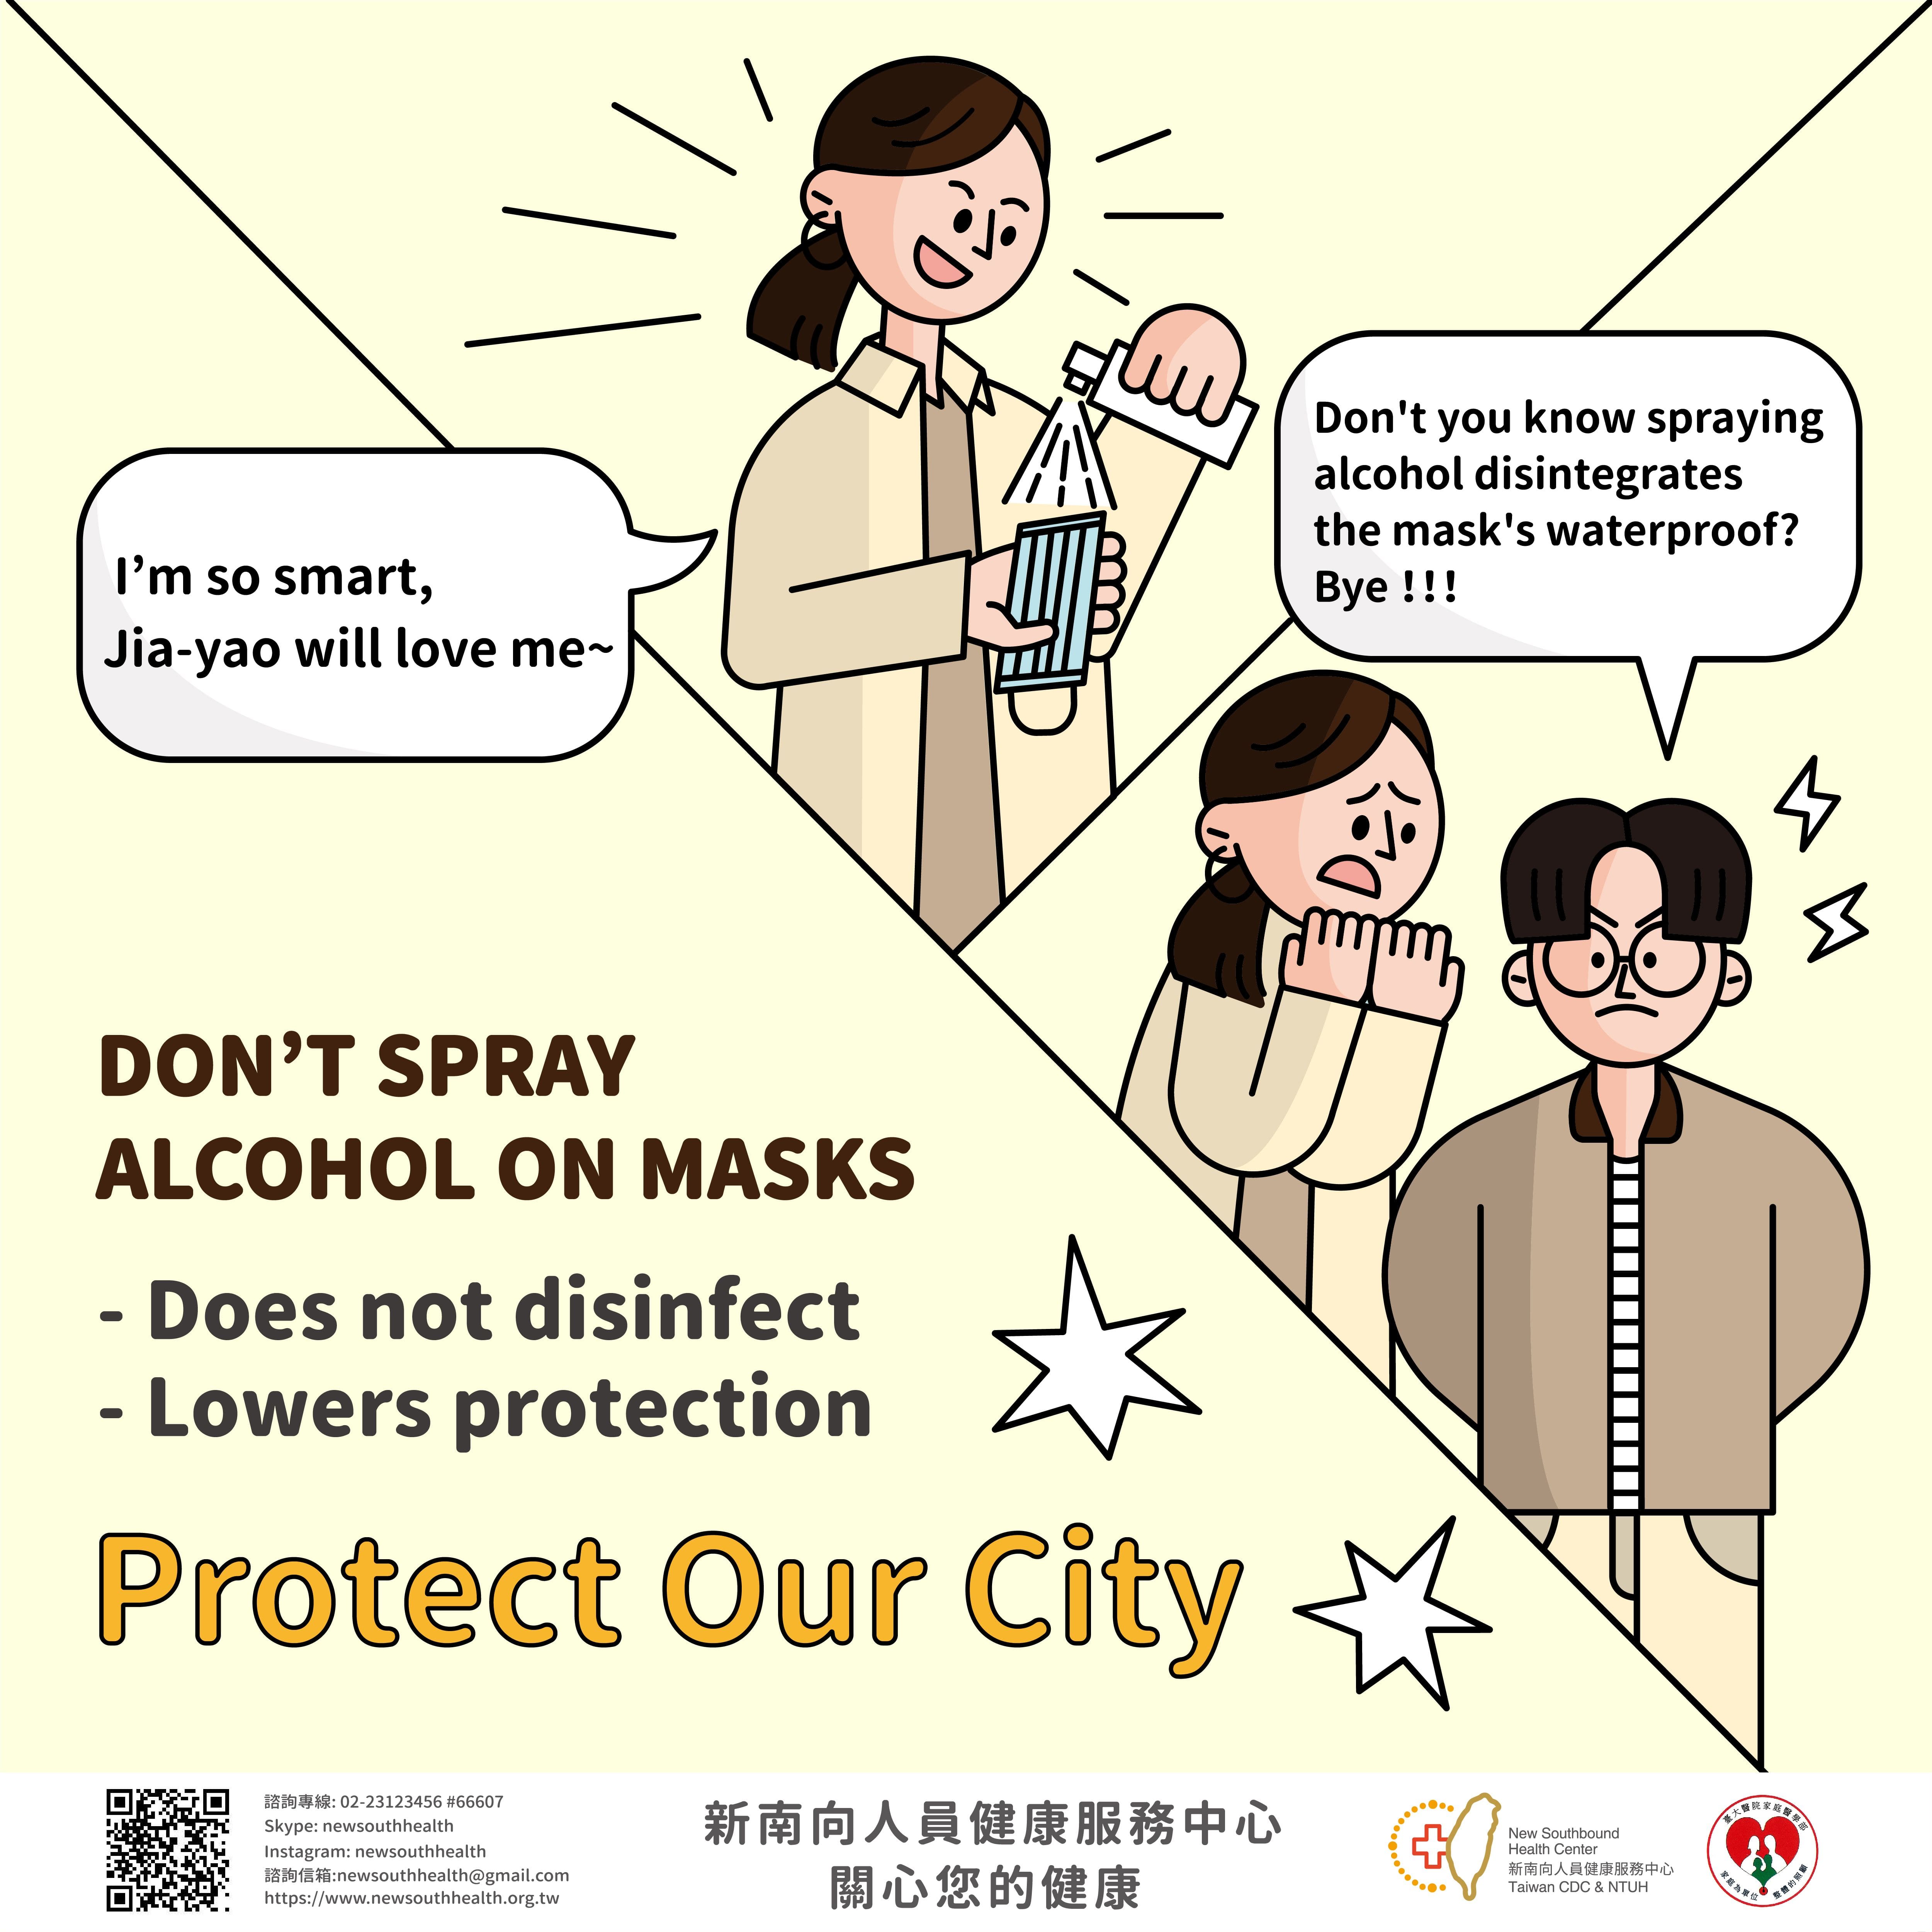 Protect Our City-Don't Spray Alcohol on masks